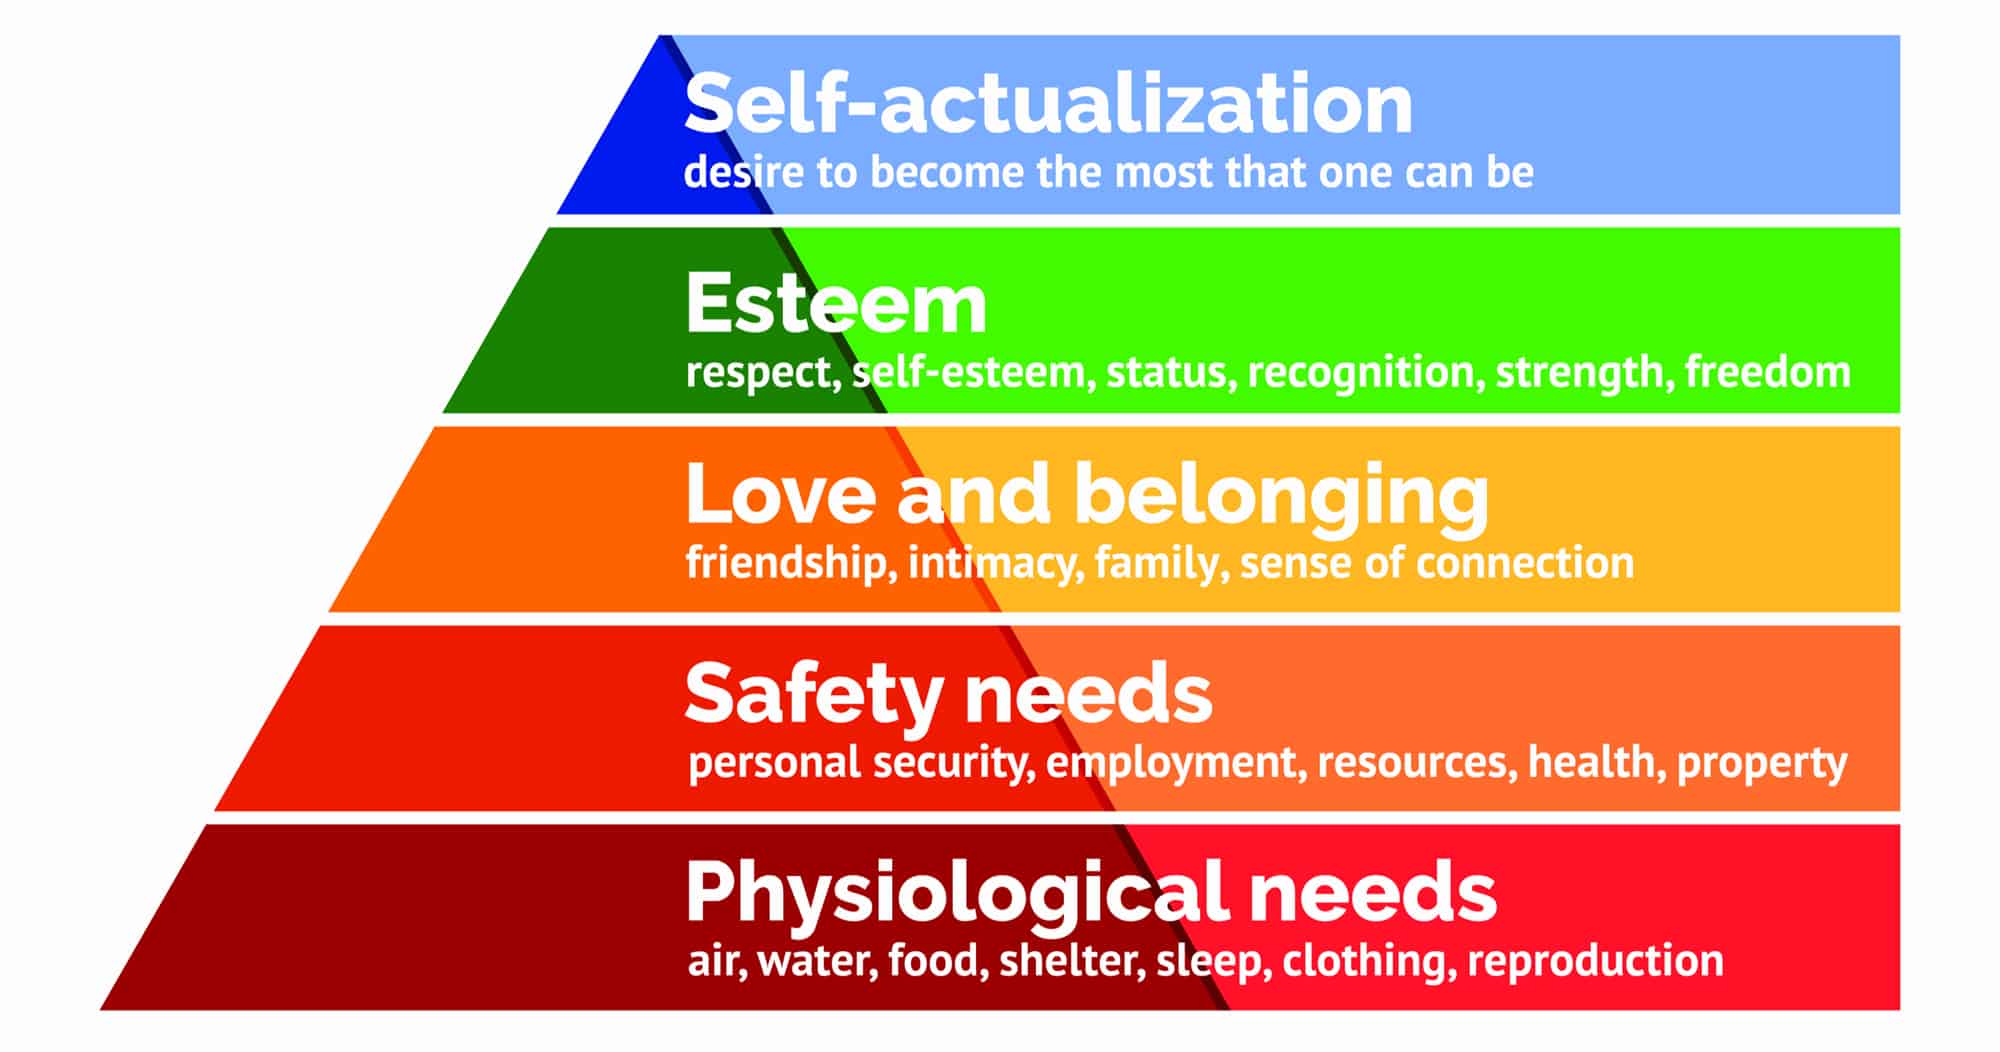 Maslows hierarchy - physiological needs, safety needs, love and belonging needs, esteem needs, 